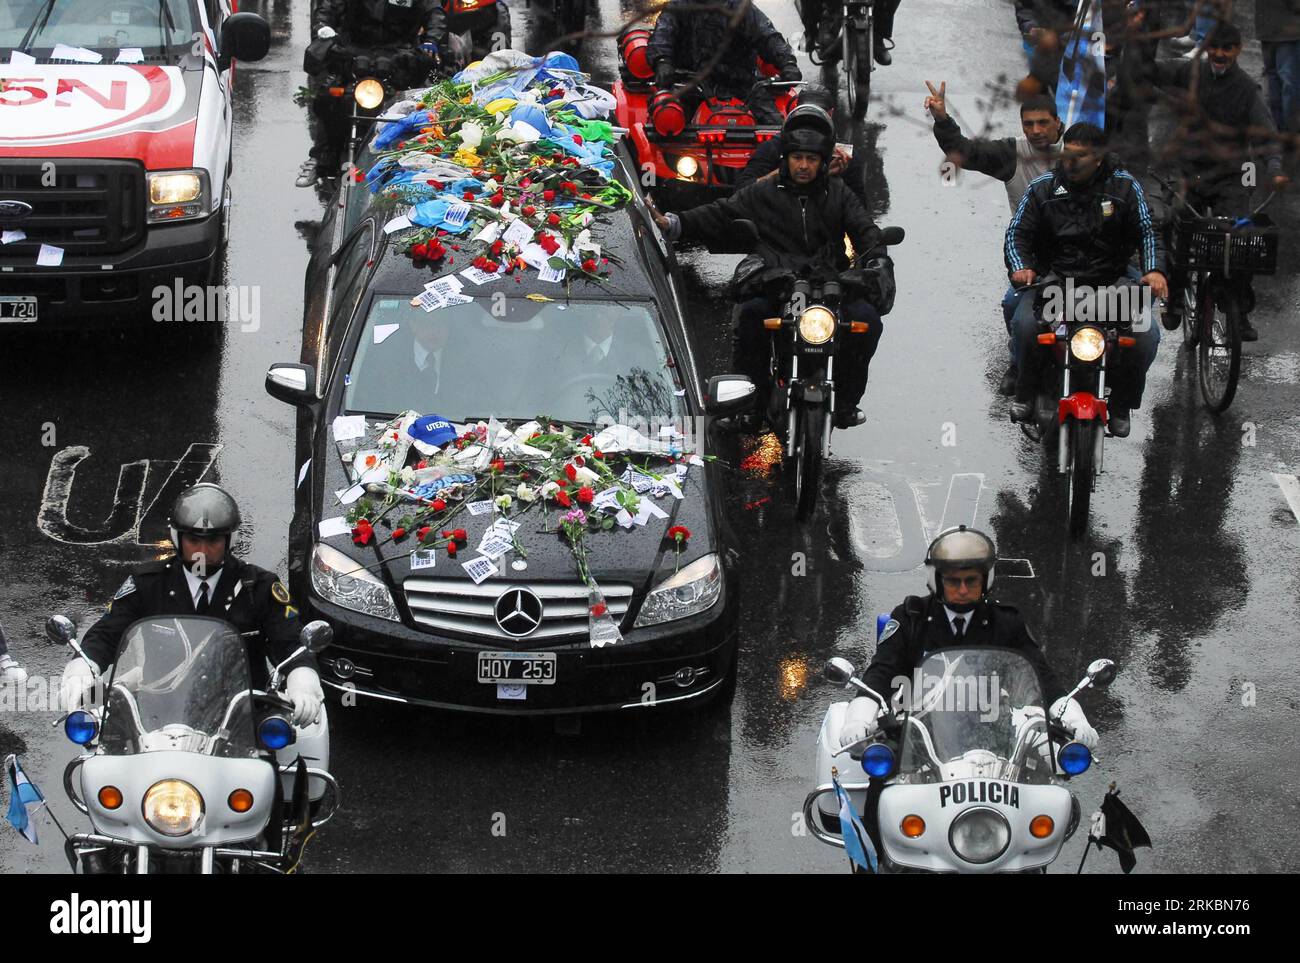 Bildnummer: 54585406  Datum: 29.10.2010  Copyright: imago/Xinhua (101029) --  BUENOS AIRES, Oct. 29, 2010 (Xinhua) -- Police escort the hearse which carries the remains of former Argentine President Nestor Kirchner from the Casa Rosada Presidential Palace to a local airport for a flight to his home El Calafate, Province of Santa Cruz, where he will be buried in his family cemetery, Oct. 29, 2010. (Xinhua/Luciano Thieberger) ARGENTINA-BUENOS AIRES-KIRCHNER-FUNERAL PUBLICATIONxNOTxINxCHN People Politik Beerdigung Trauer Kirchner premiumd kbdig xcb 2010 quer    Bildnummer 54585406 Date 29 10 2010 Stock Photo